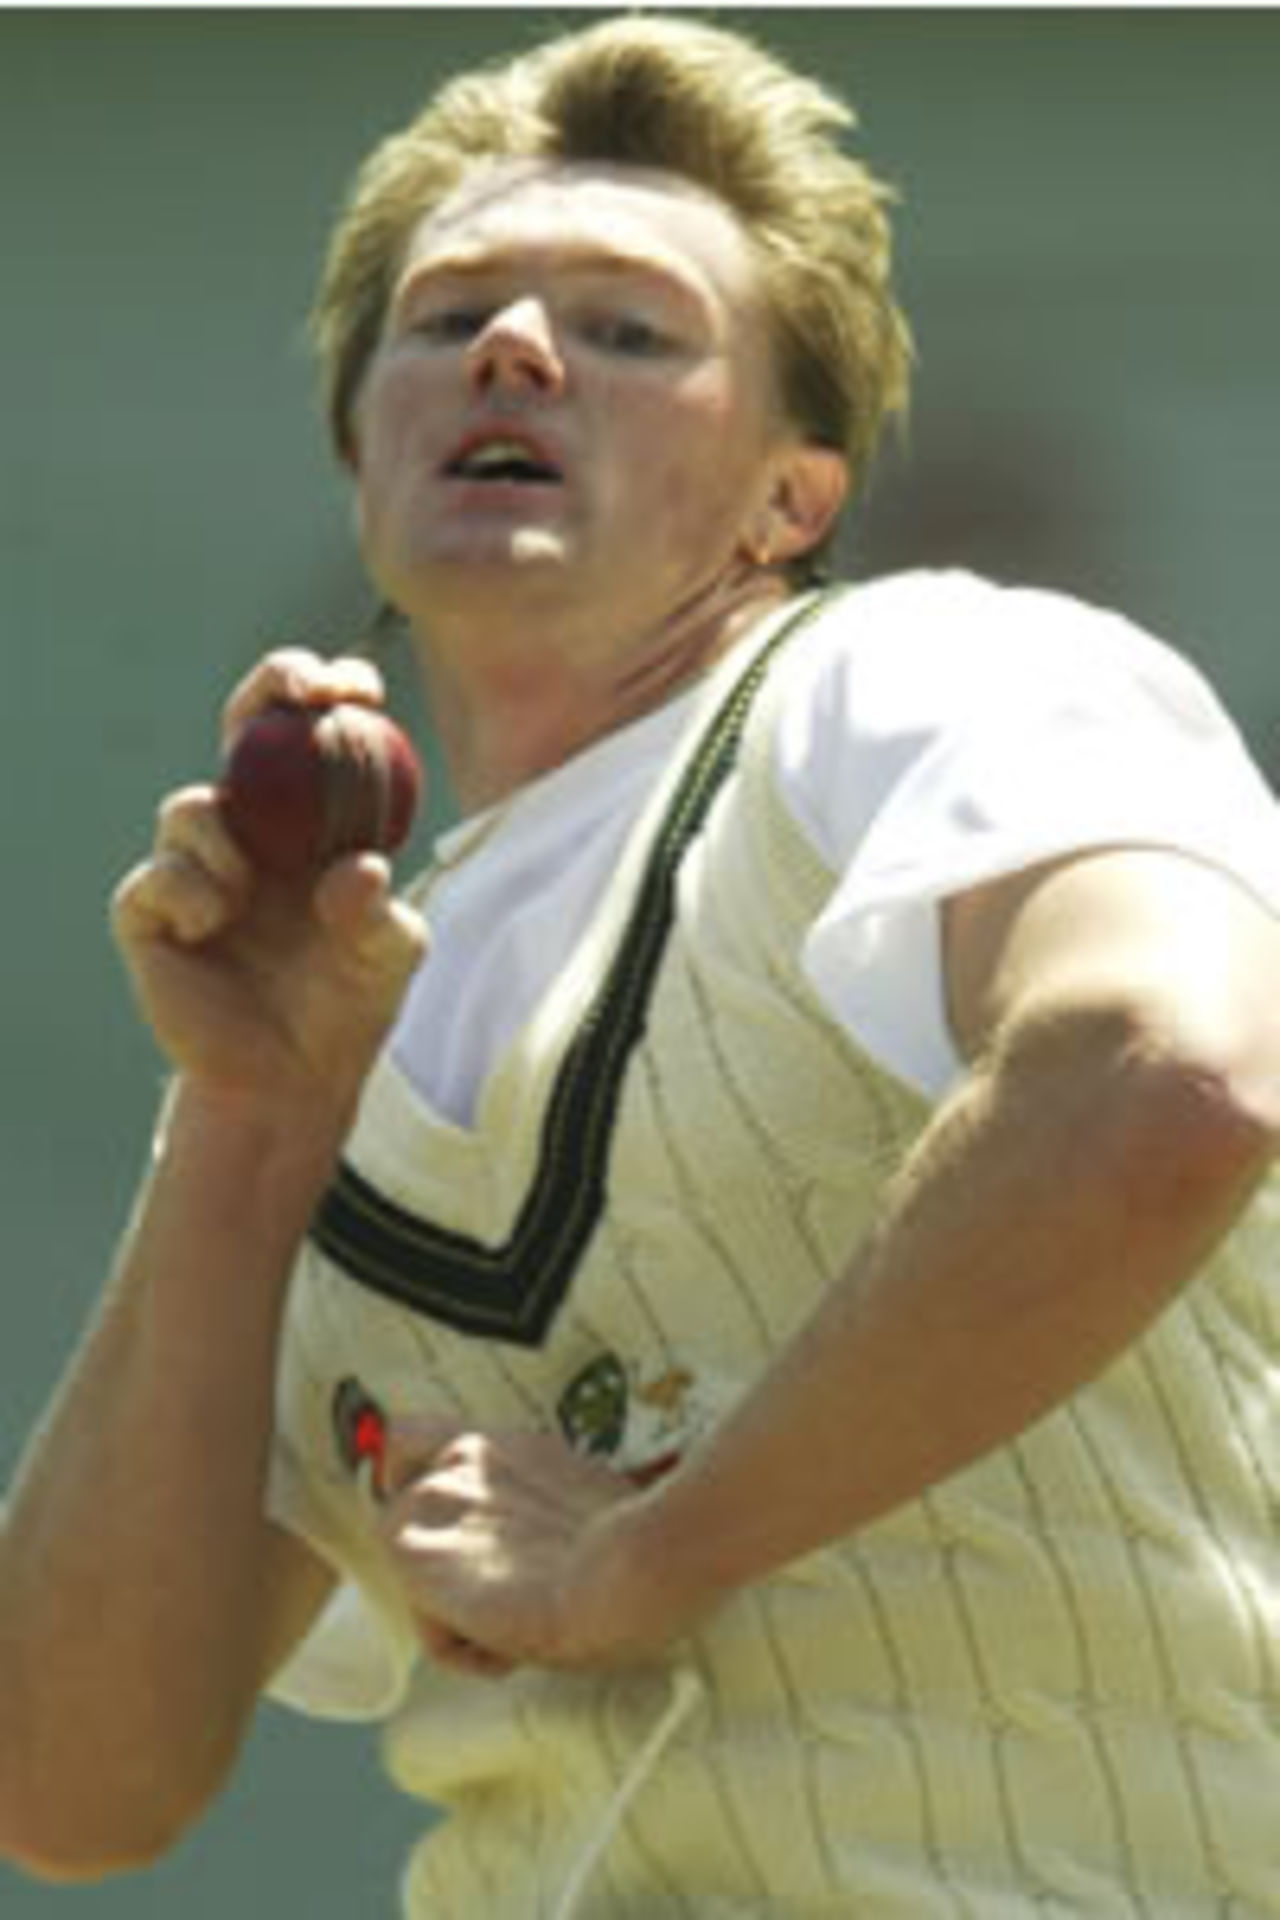 Brad Williams of Australia in action during training at the SCG on October 15, 2003 in Sydney, Australia.